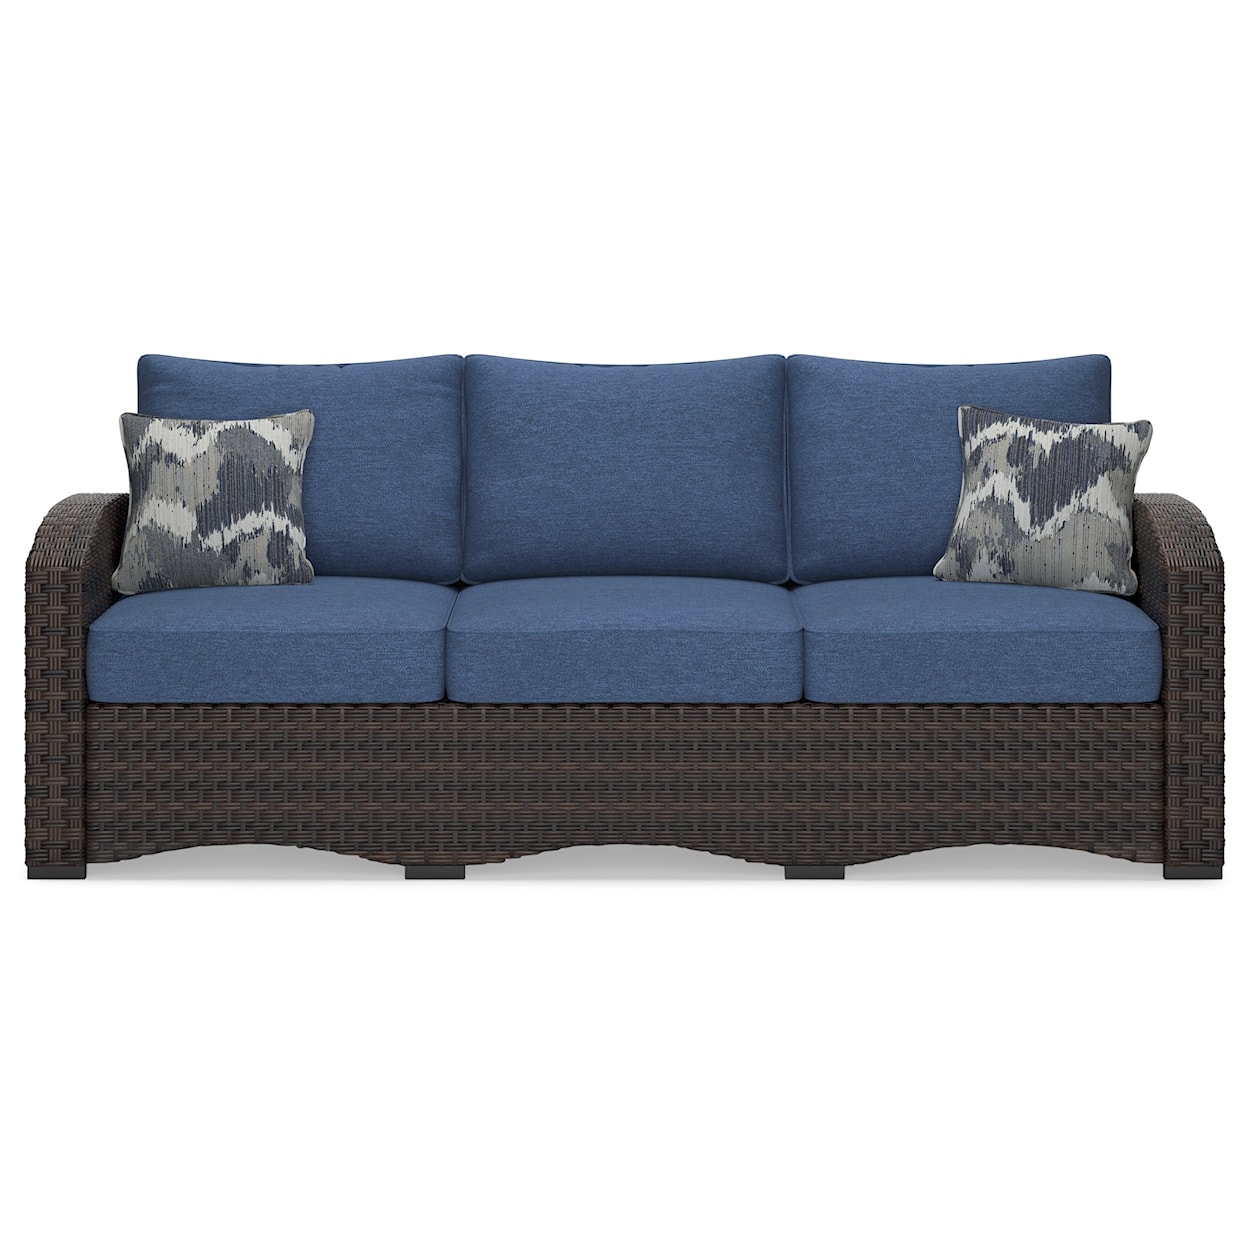 Signature Windglow Outdoor Sofa With Cushion